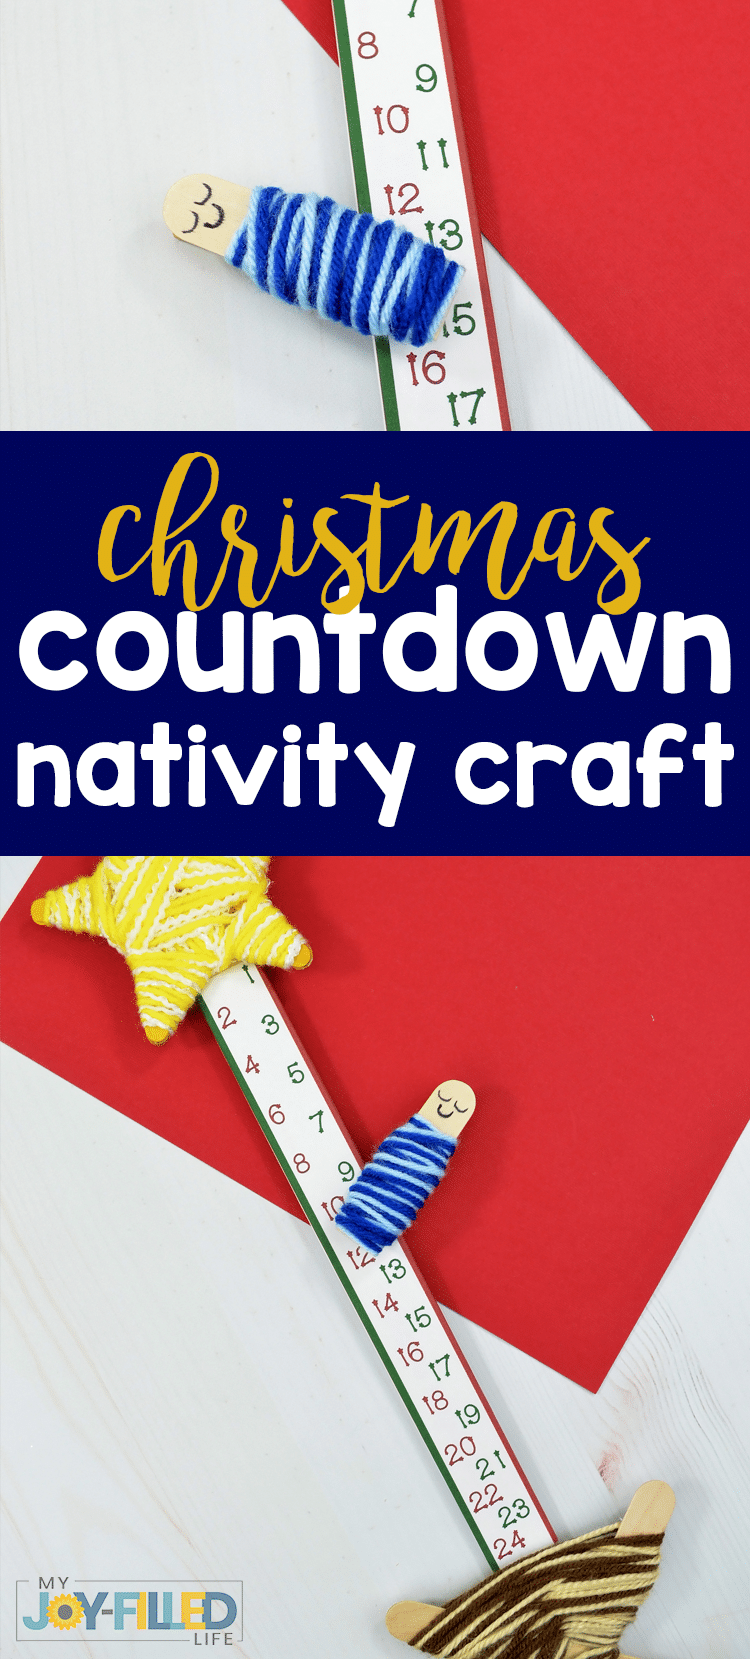 You and your kids will love using this nativity craft for a Christmas countdown this year. Includes a FREE printable. #christmas #nativity #kidcraft #christmascraft #nativitycraft